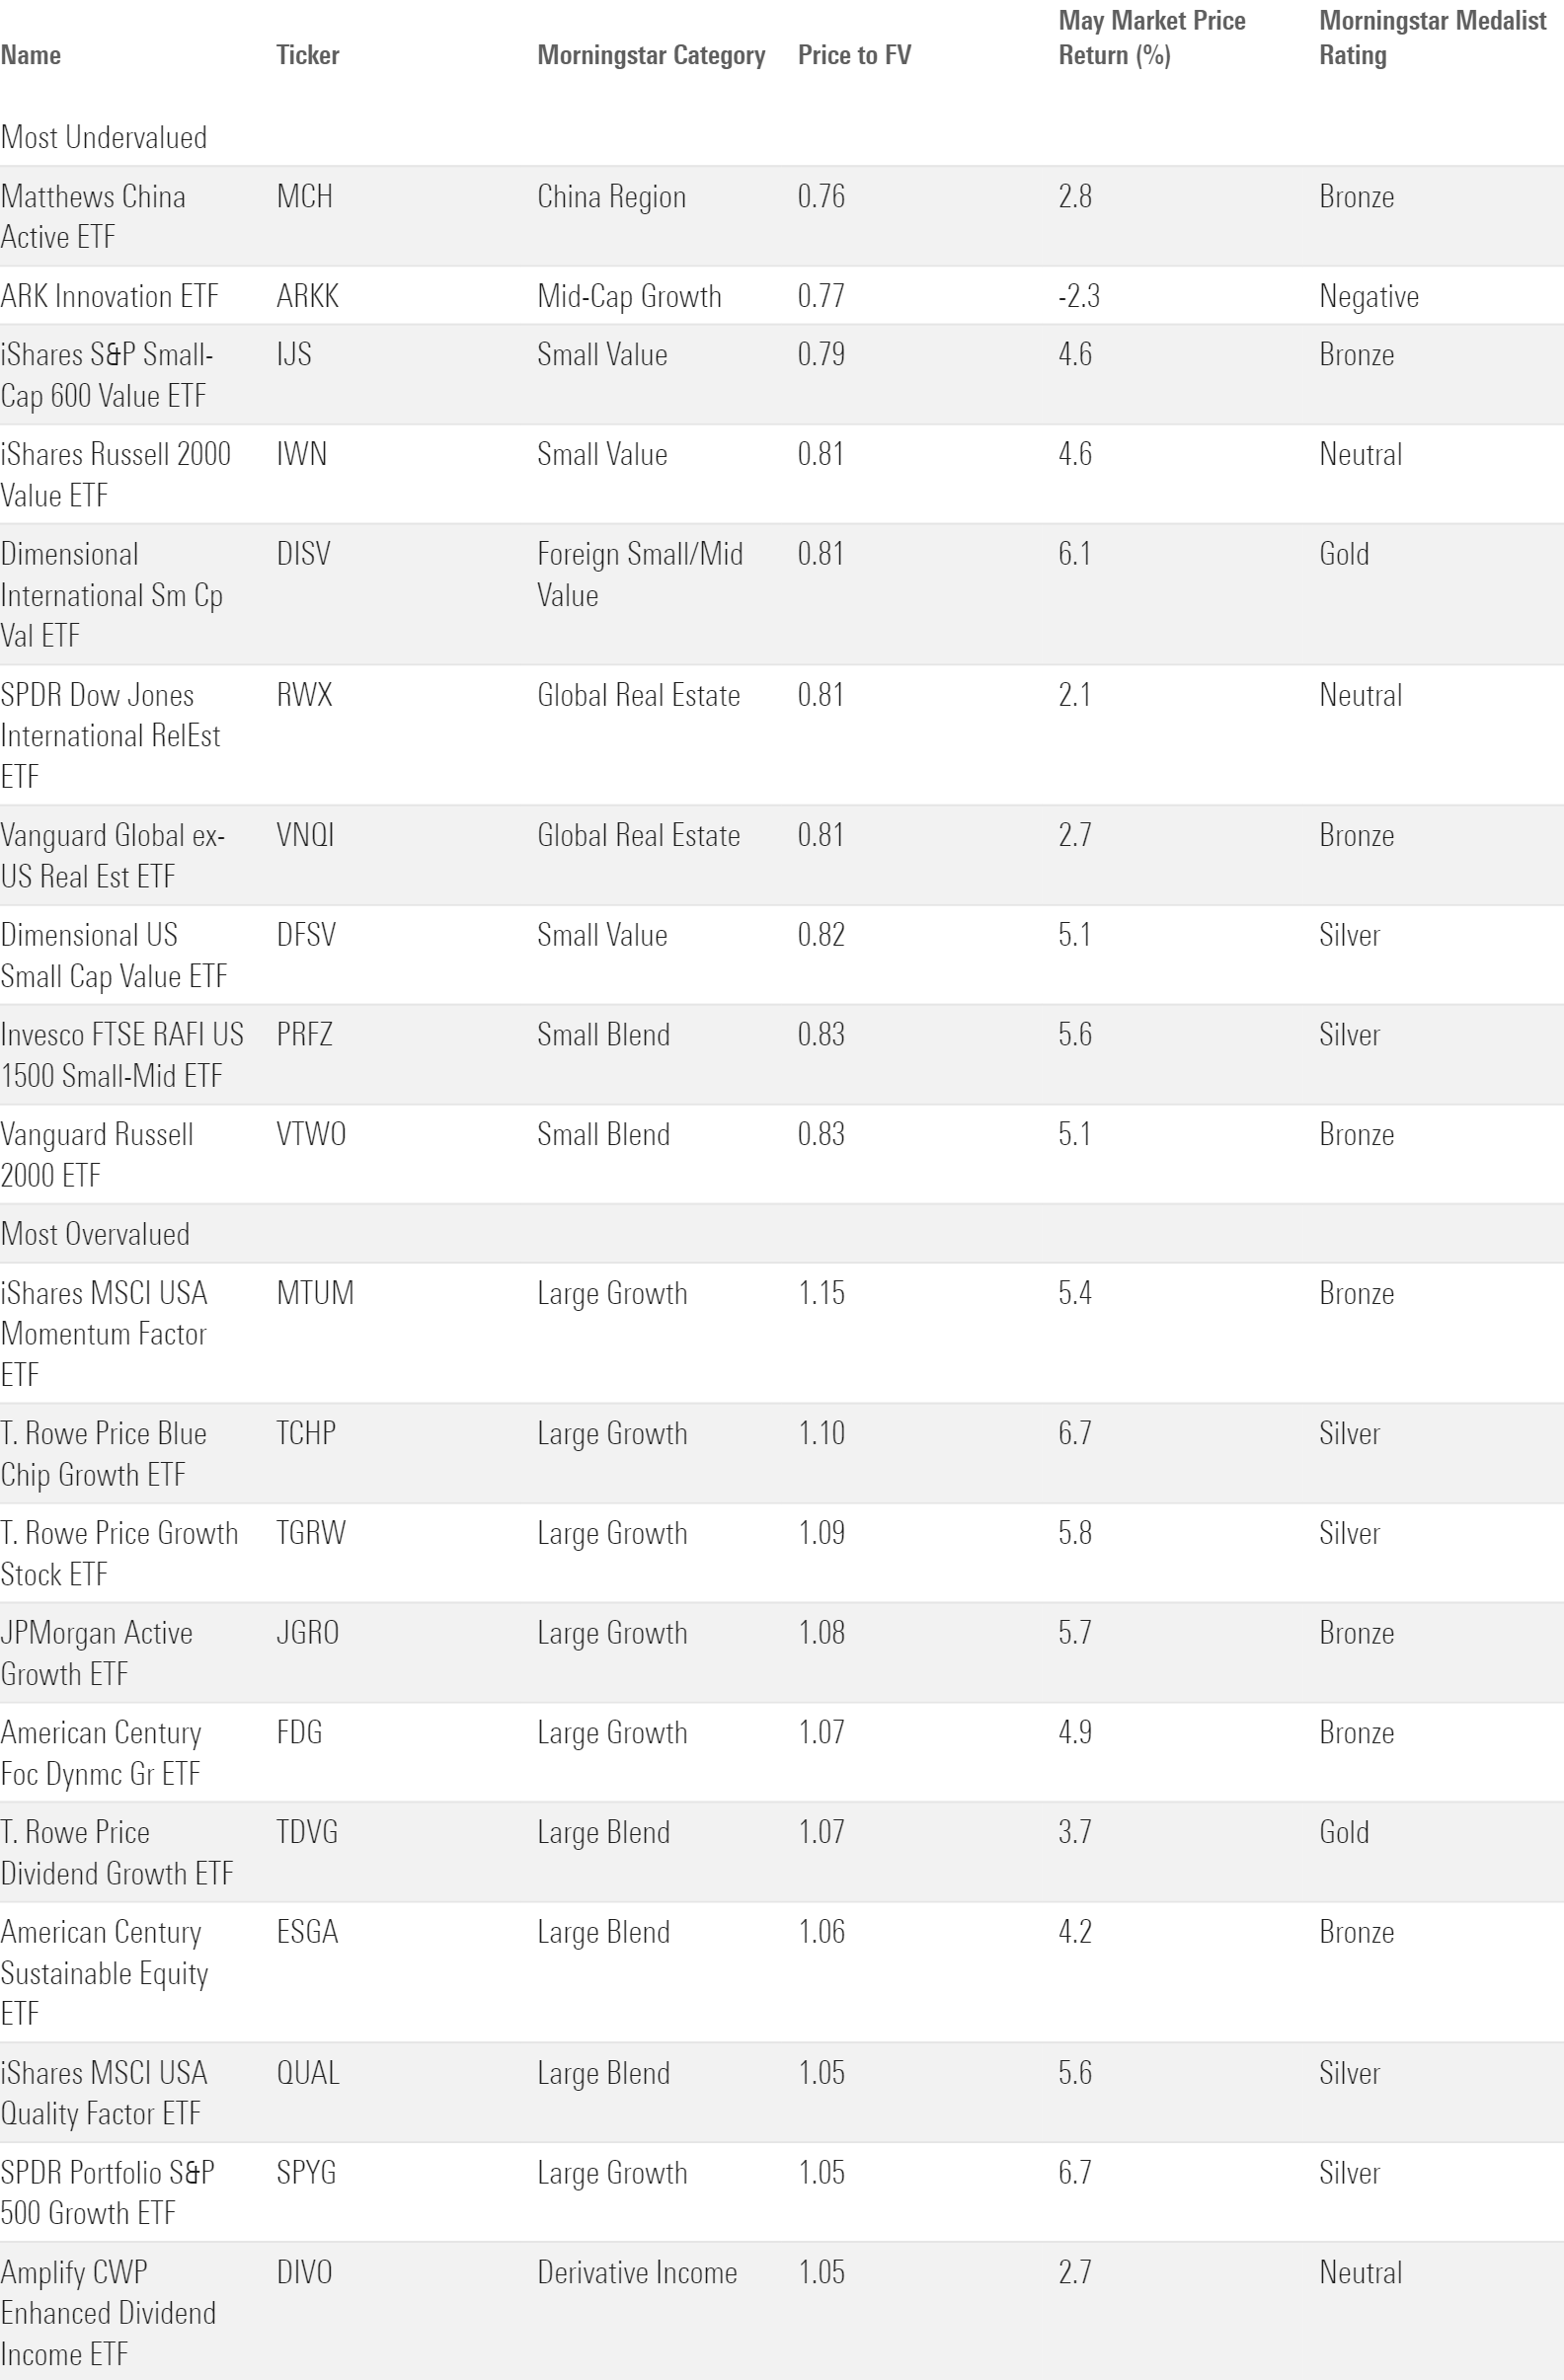 Table of the 10 most under- and overvalued US ETFs, according to Morningstar price/fair value ratio.